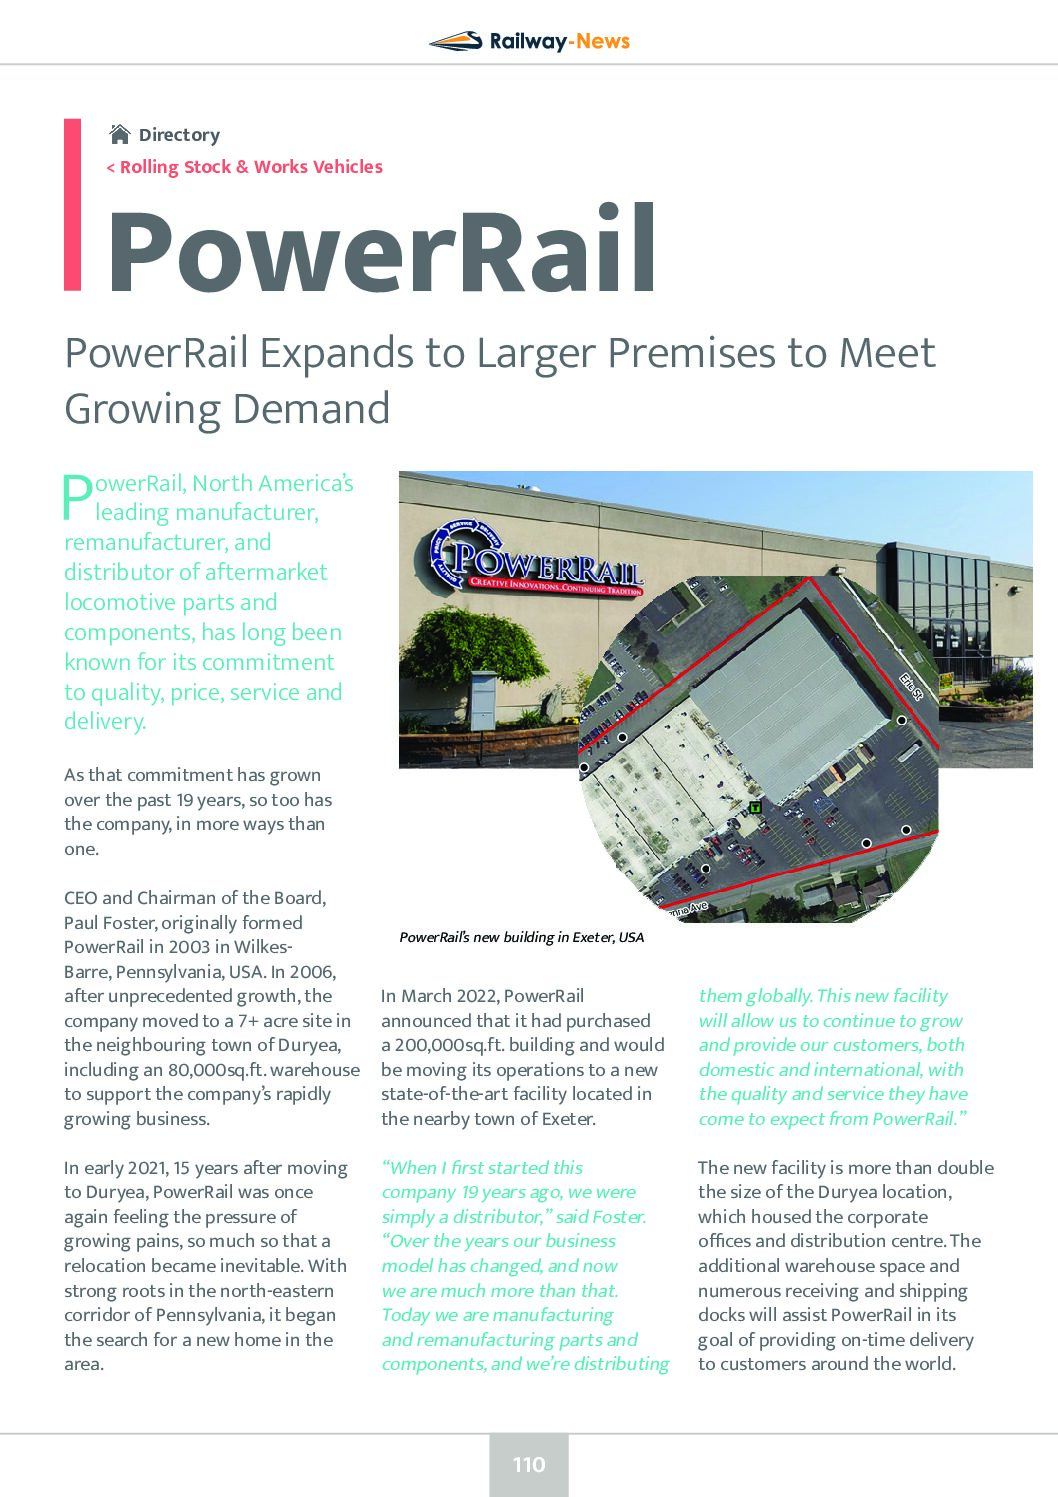 PowerRail Expands to Larger Premises to Meet Growing Demand